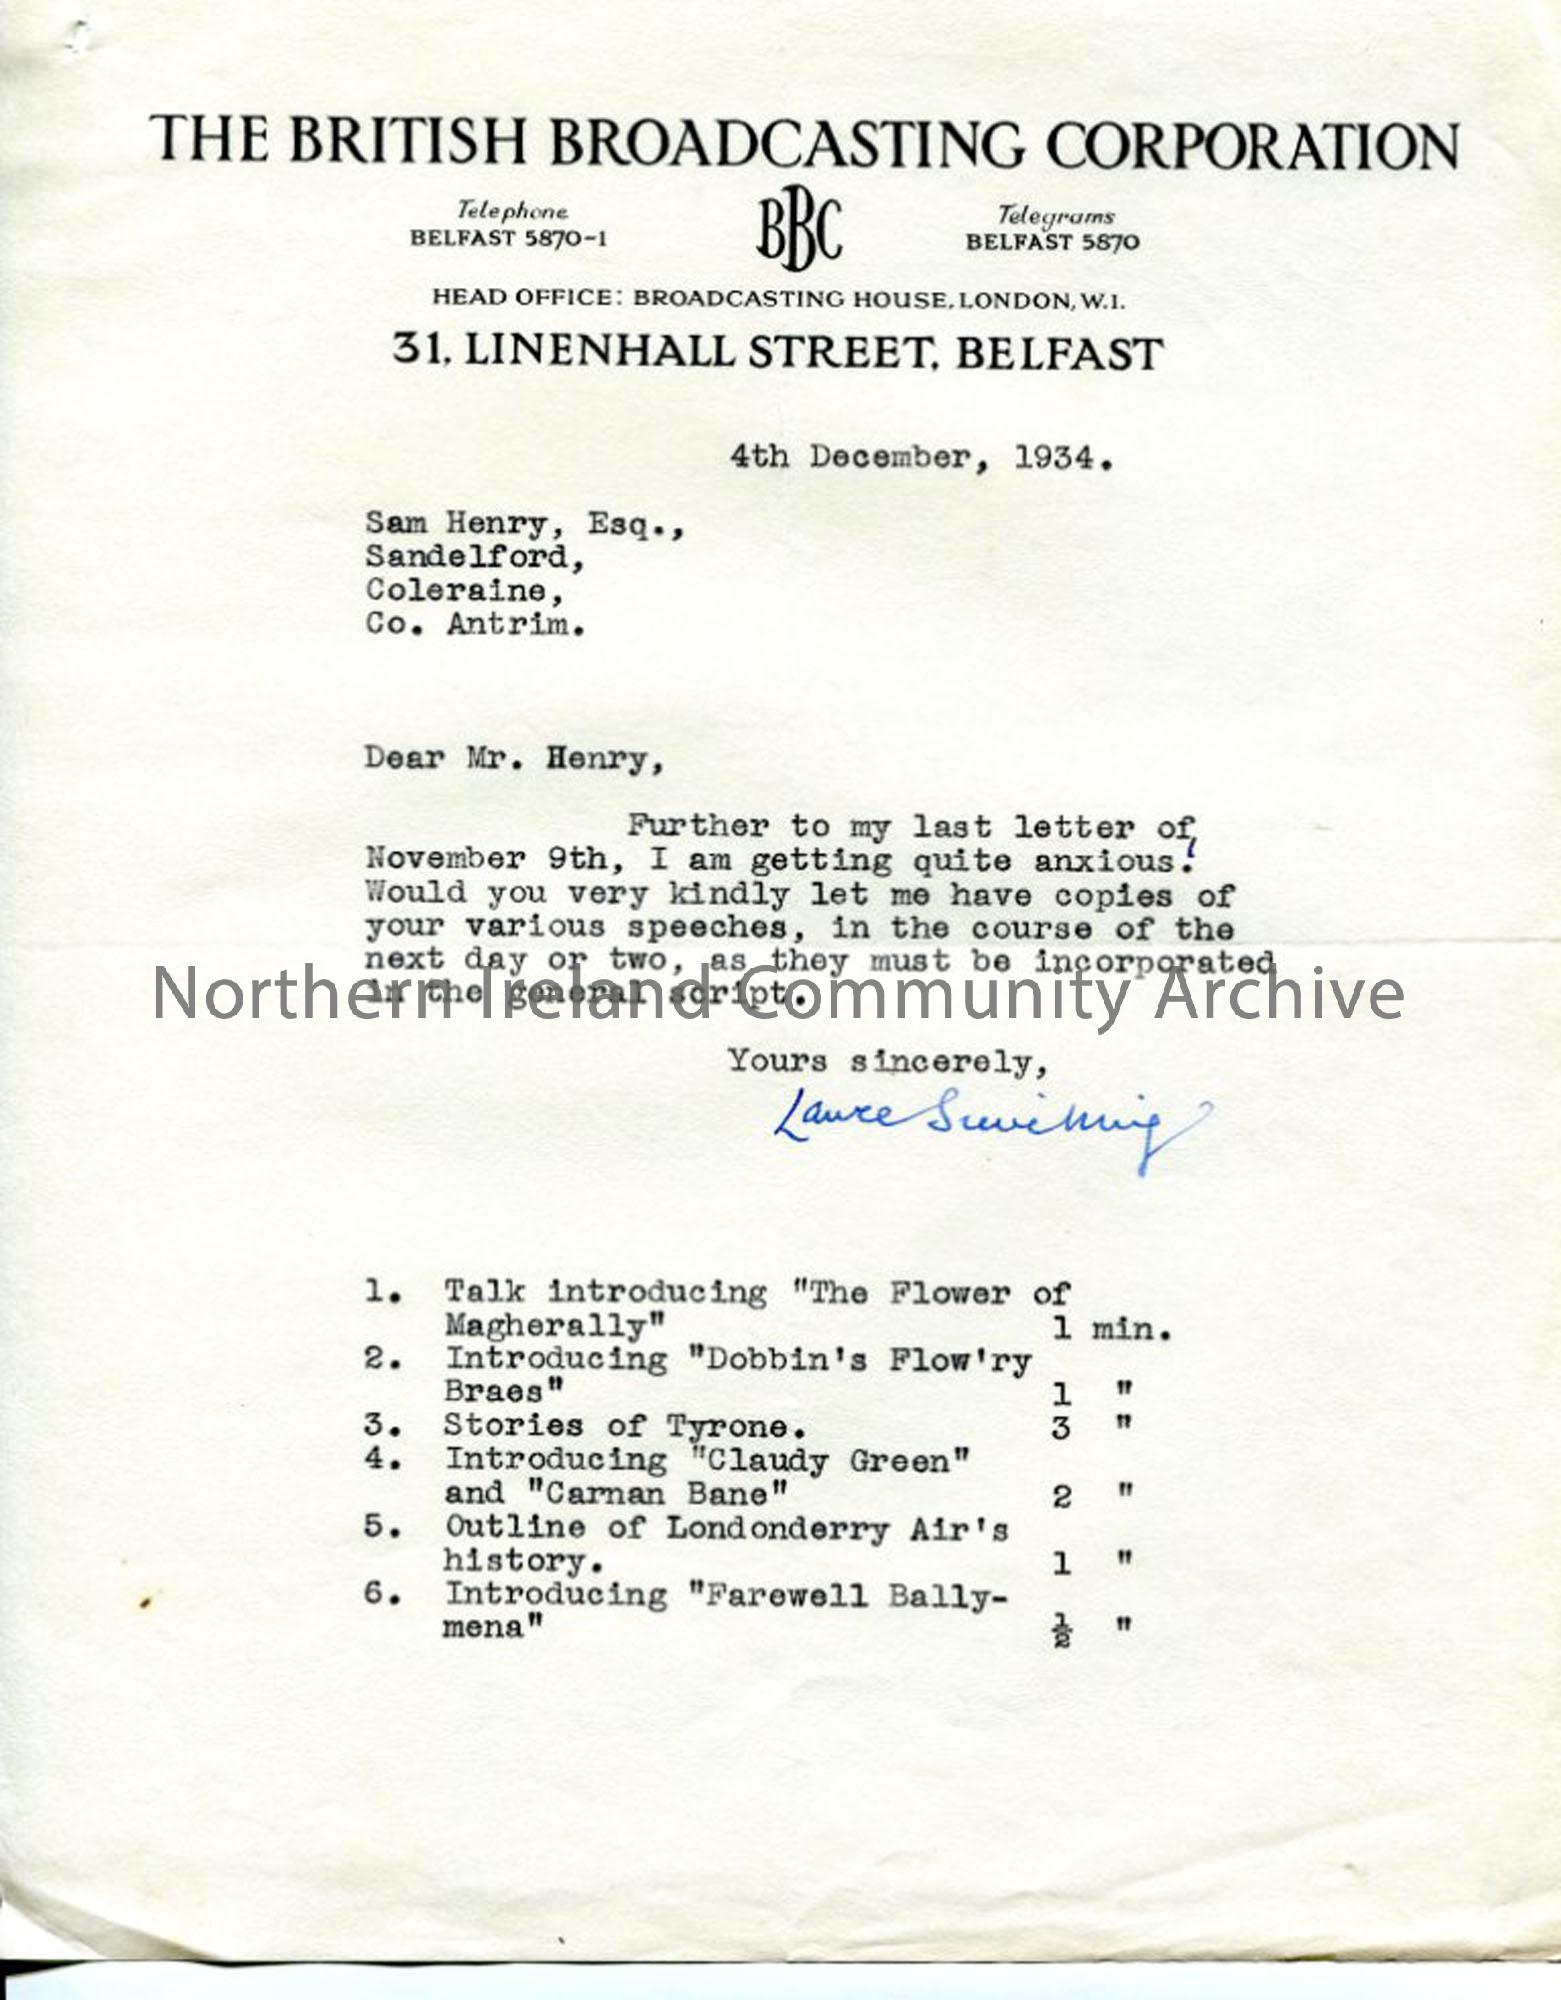 Letter from Lance Sieveking of the BBC, dated 4.12.1934